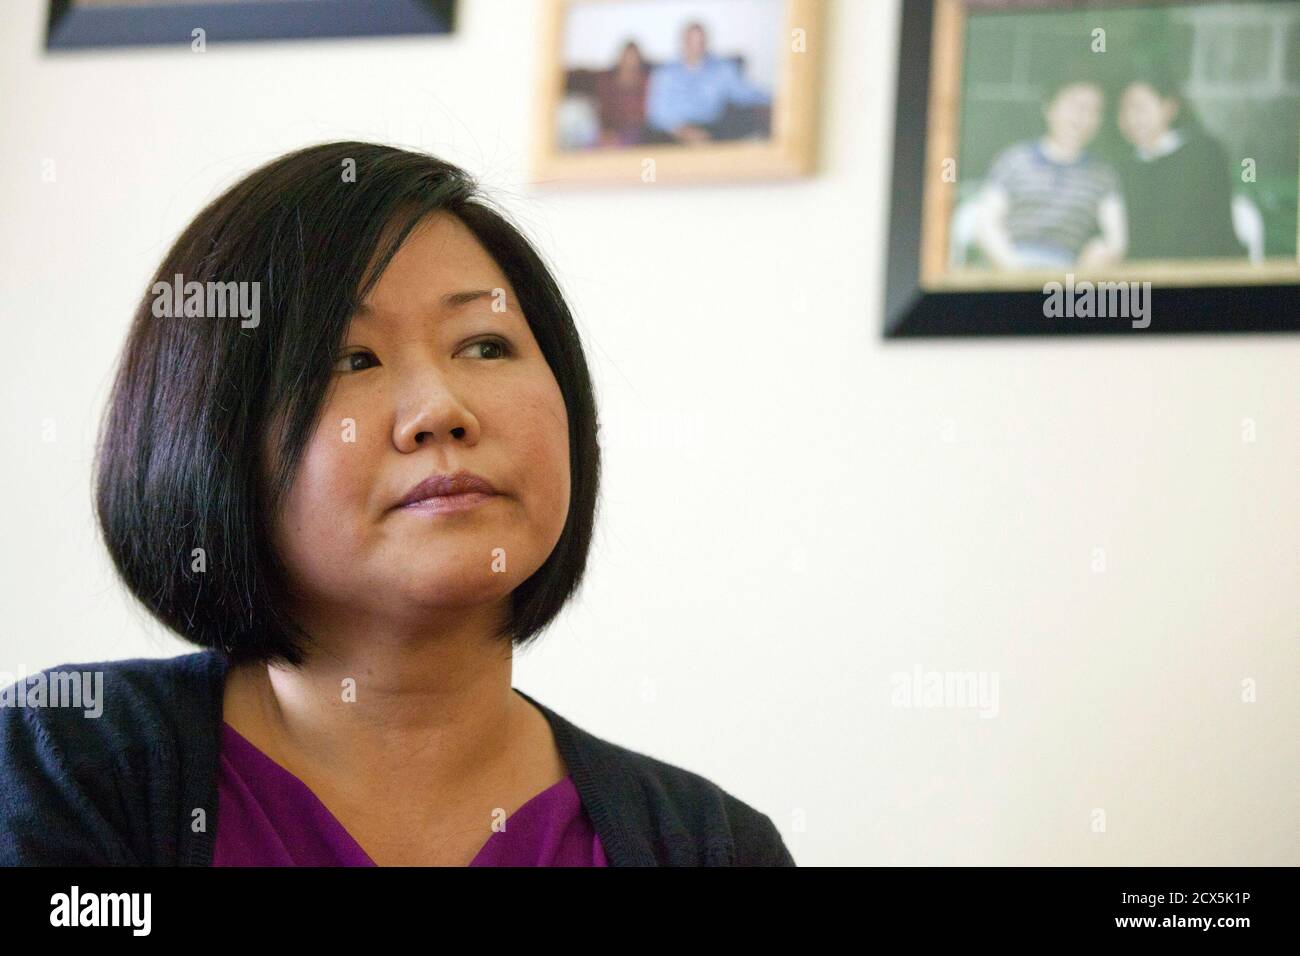 Terri Chung, sister of Kenneth Bae, is pictured during an interview with  Reuters in Lynnwood, Washington August 7, 2013. Letters sent home by  Kenneth Bae, a . citizen imprisoned in North Korea